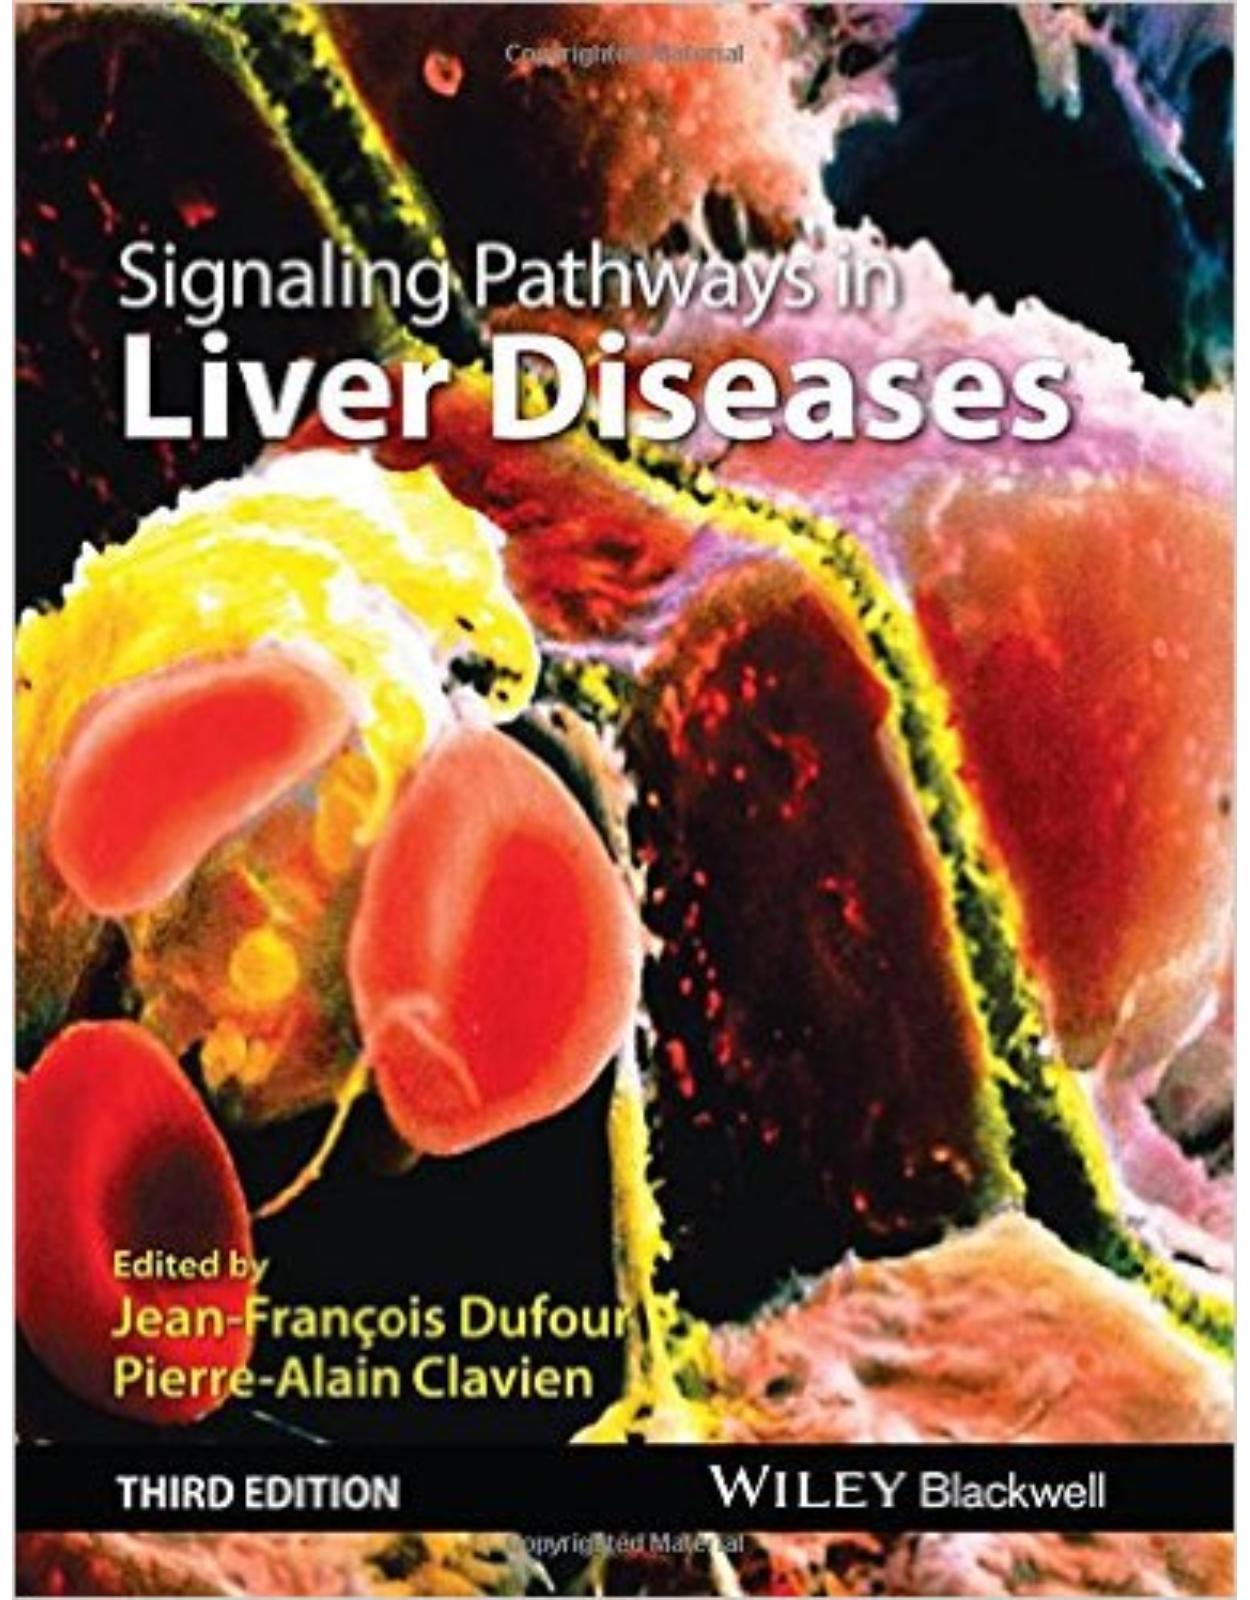 Signaling Pathways in Liver Diseases, 3rd Edition